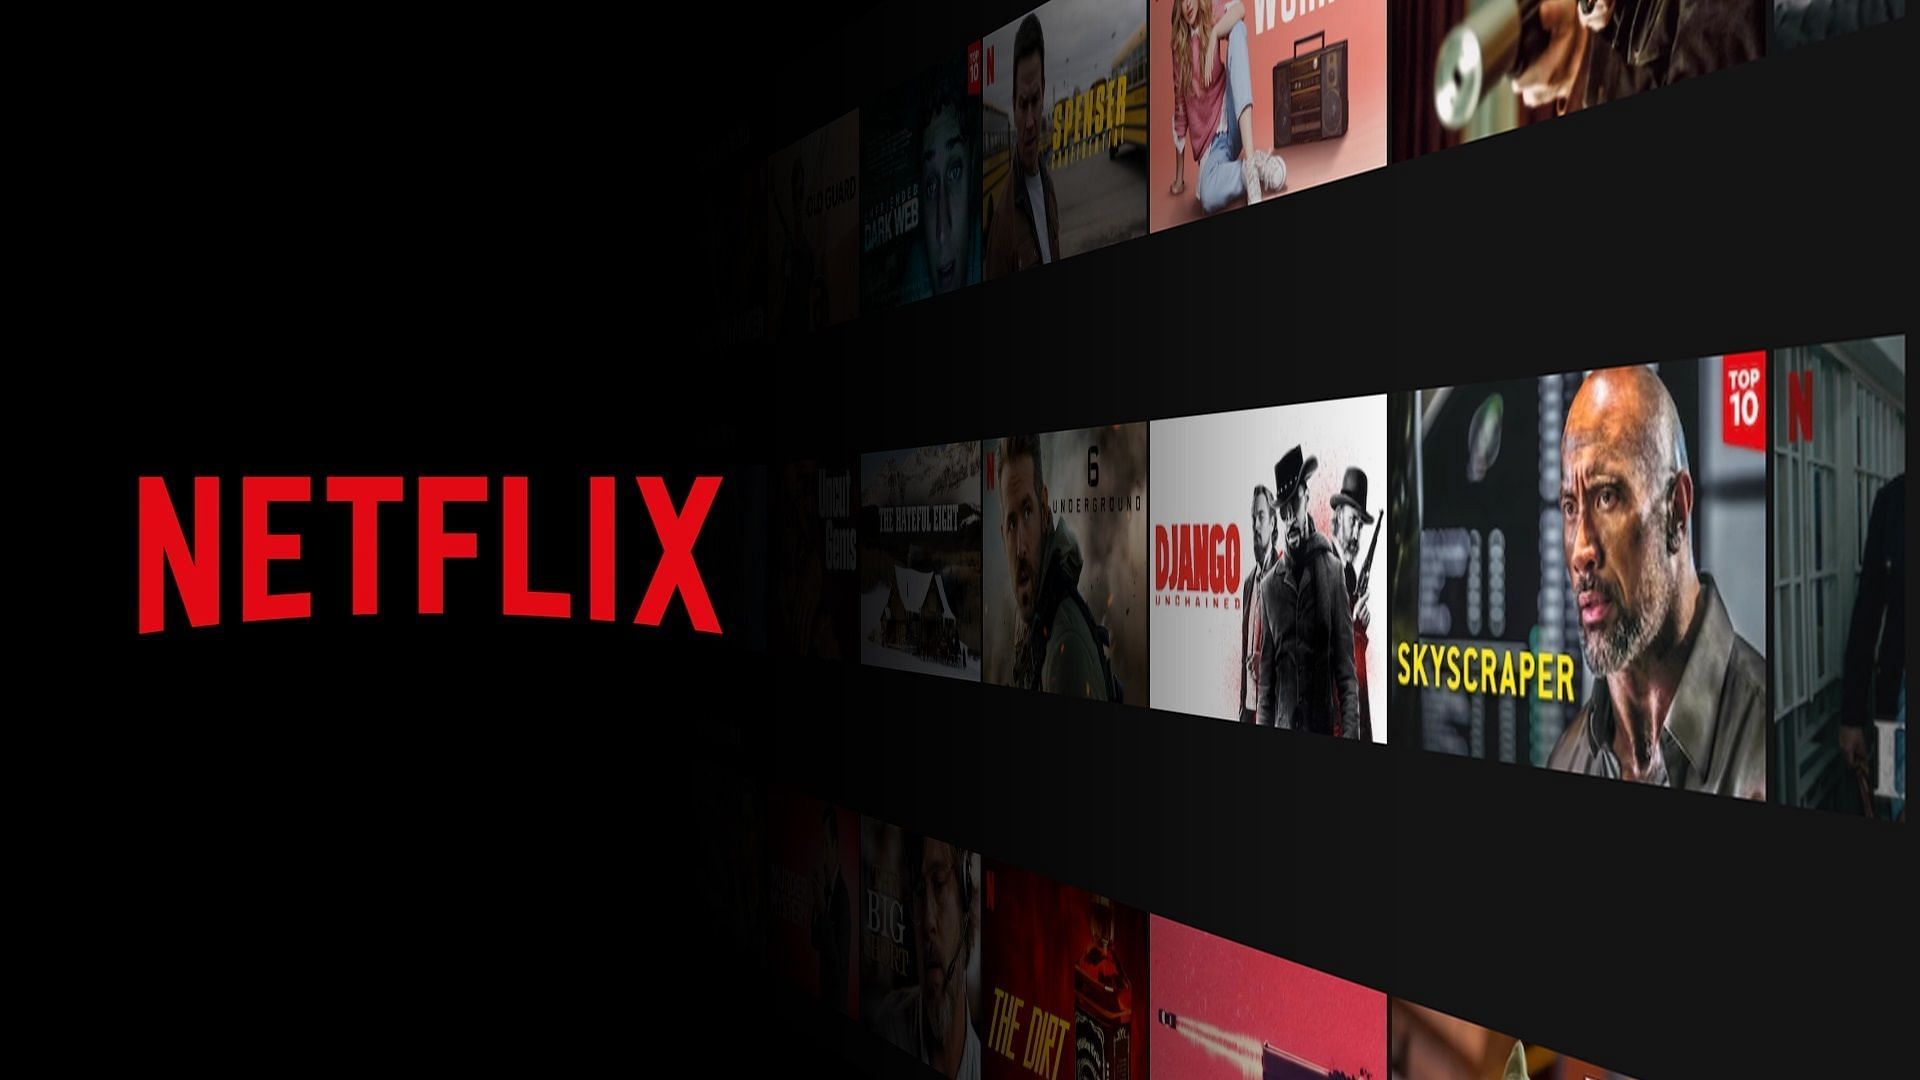 Can you download movies on Netflix? (Image via Netflix)